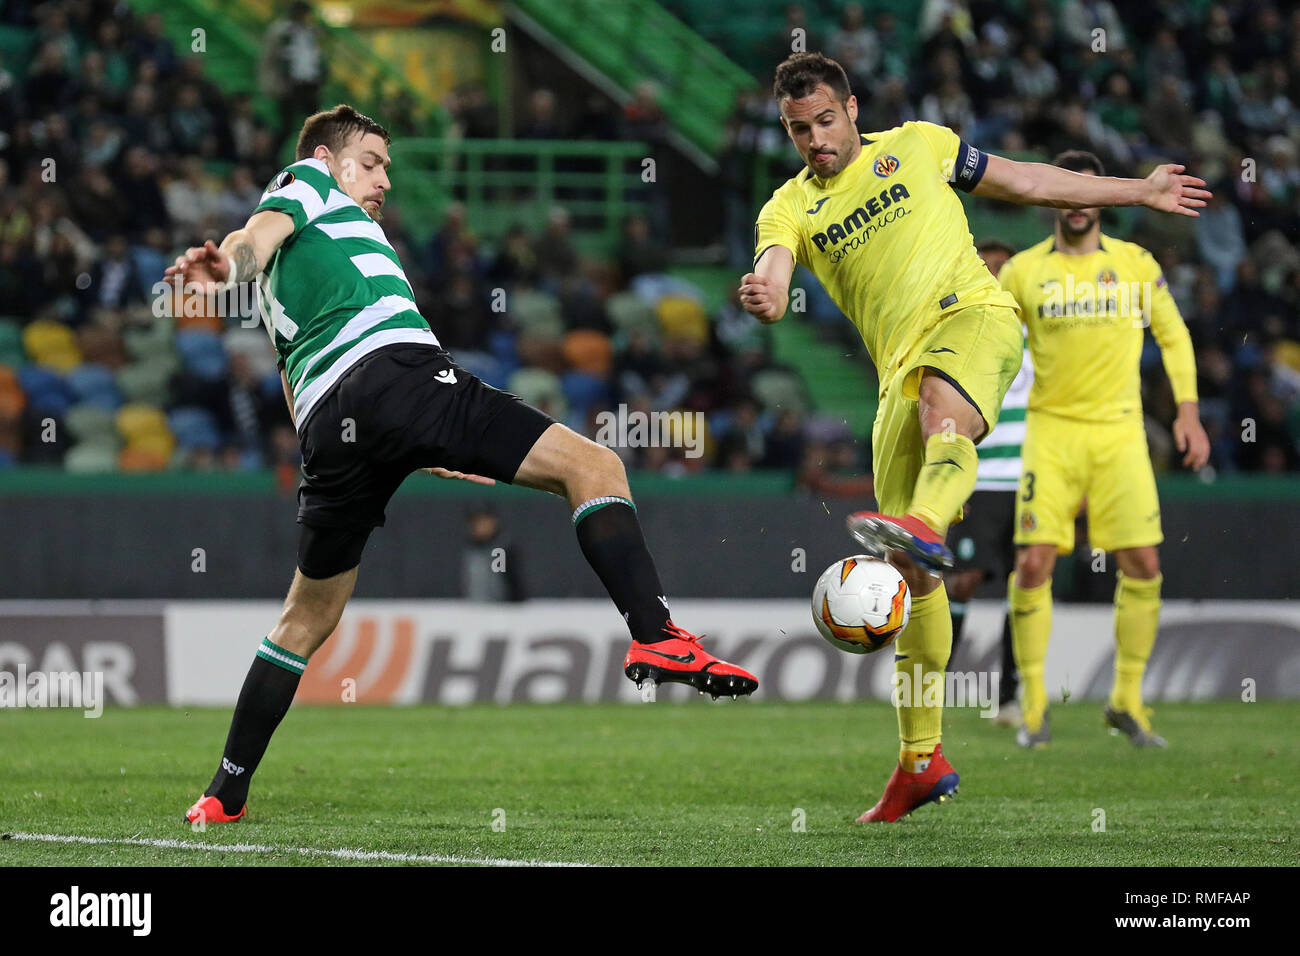 Sebastián Coates of Sporting CP (L) vies for the ball with Mario Gaspar of Villarreal FC (R) during the Europa League 2018/2019 footballl match between Sporting CP vs Villarreal FC.  (Final score: Sporting CP 0 - 1 Villarreal FC) Stock Photo